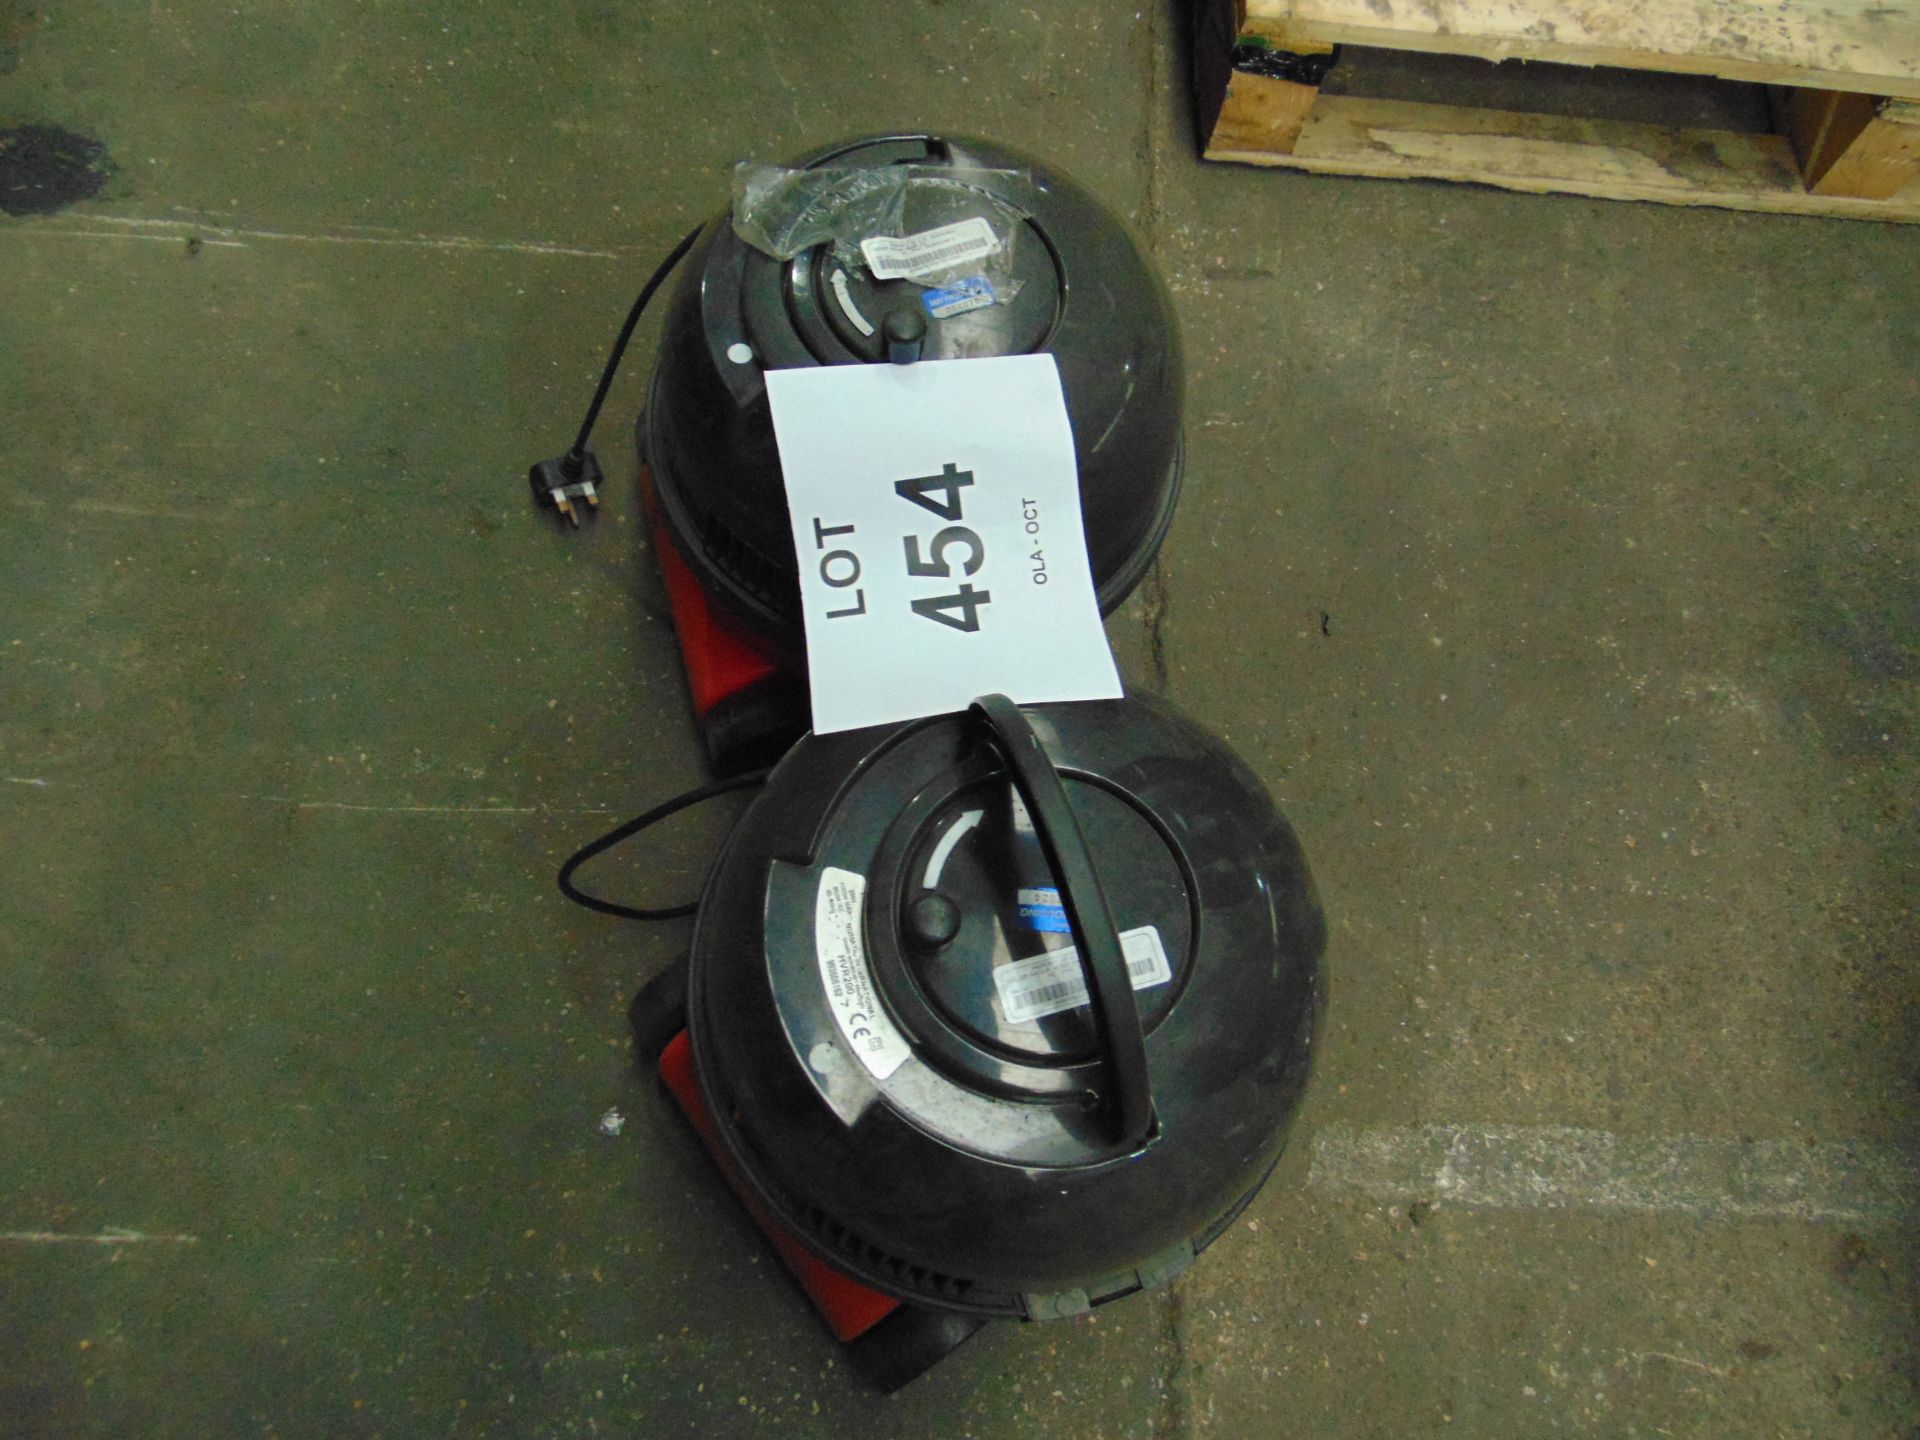 2 x Henry Vacuum Cleaners as Shown